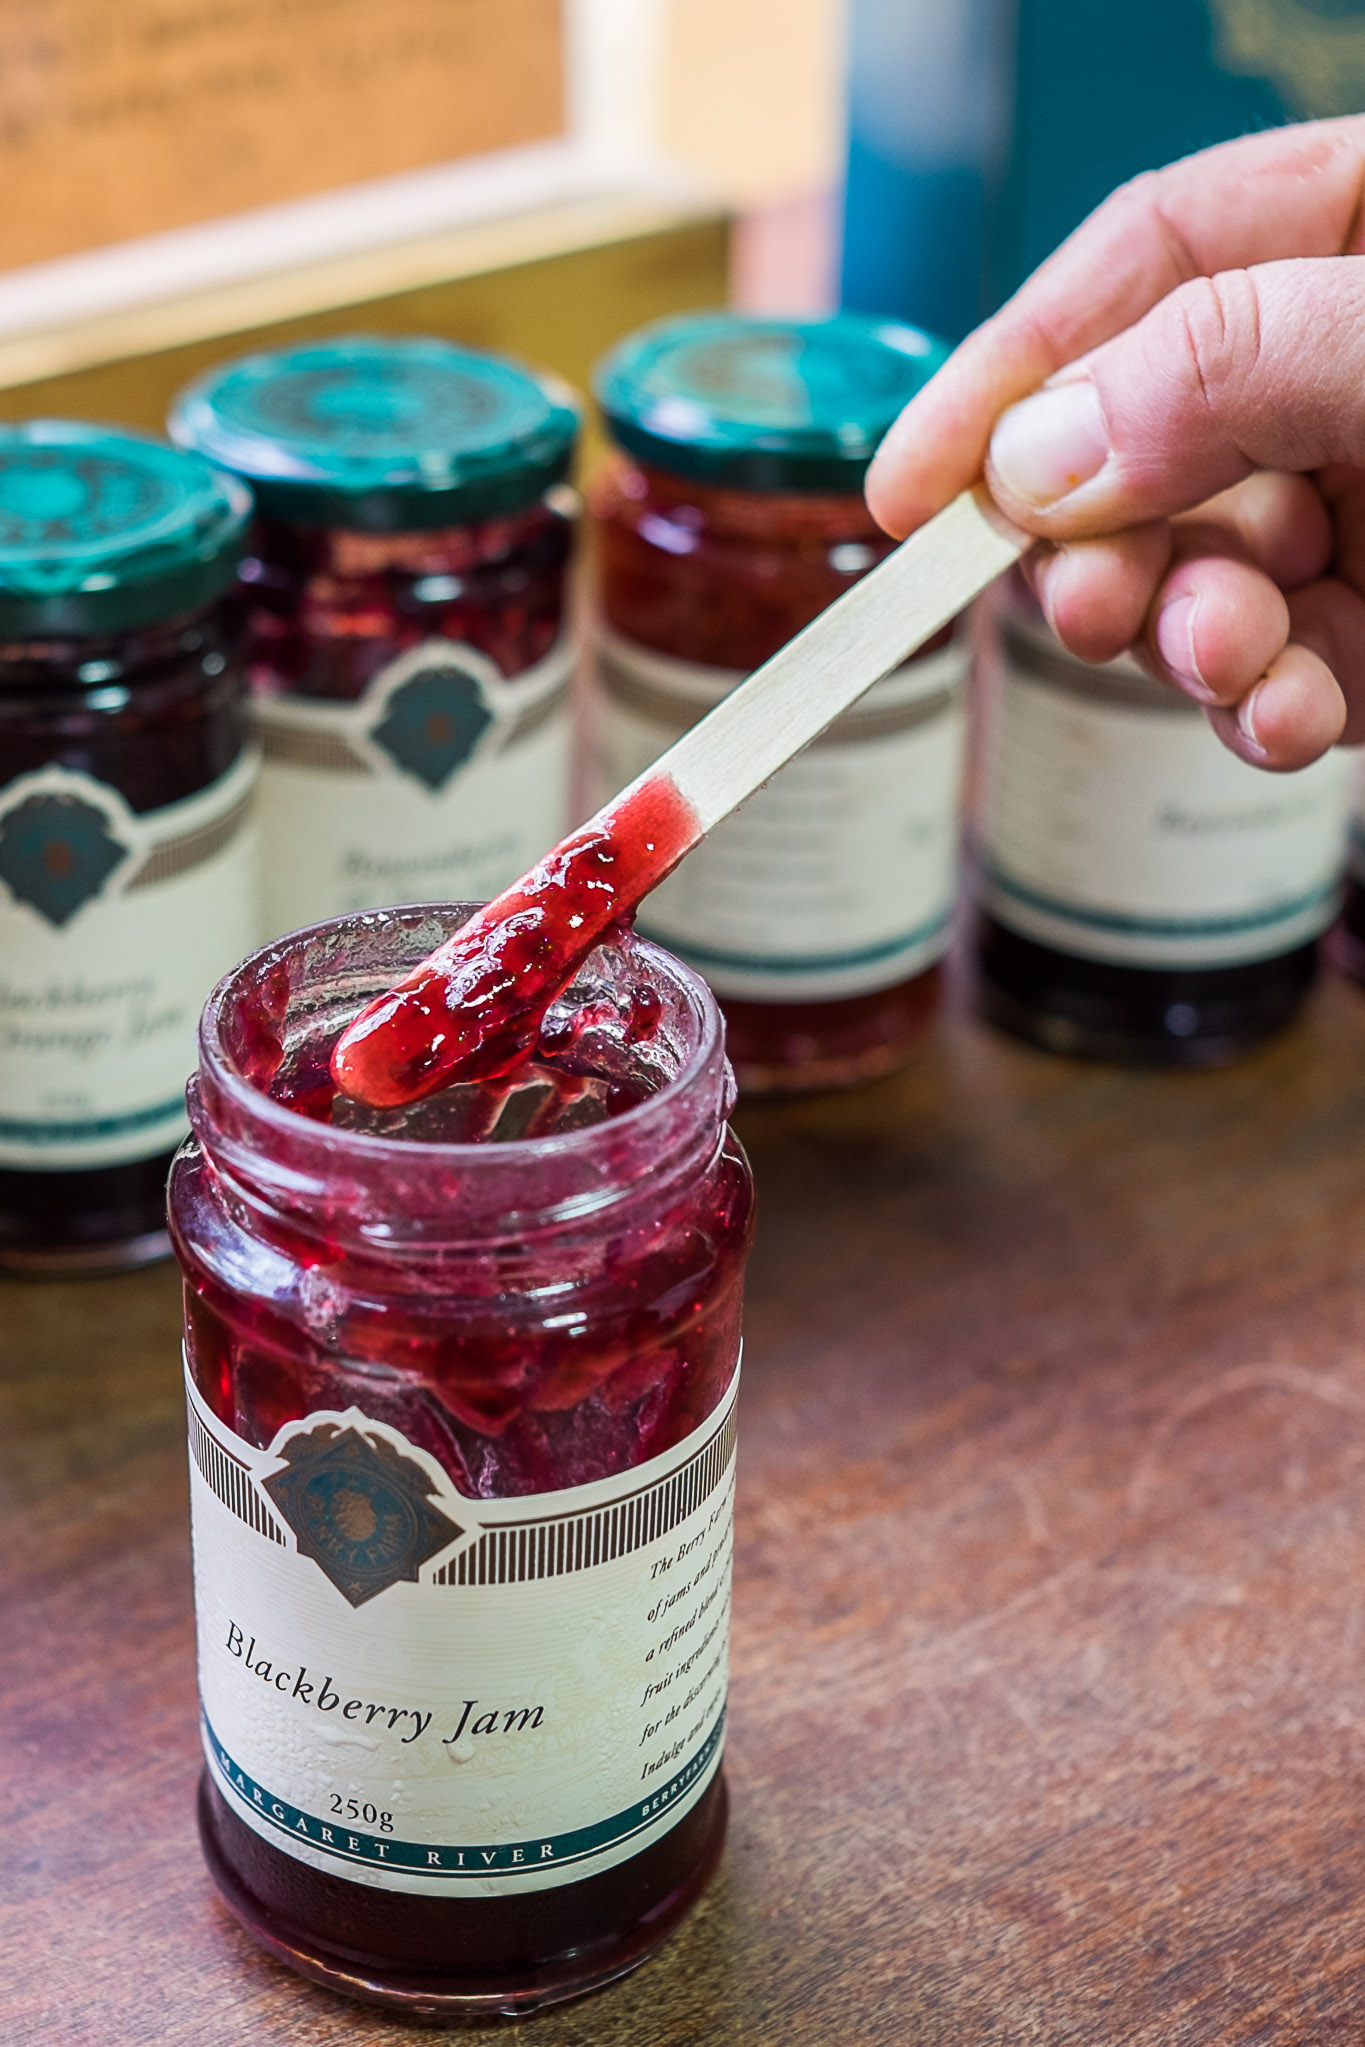 The Berry Farm's range of jams and marmalades is available for tasting.